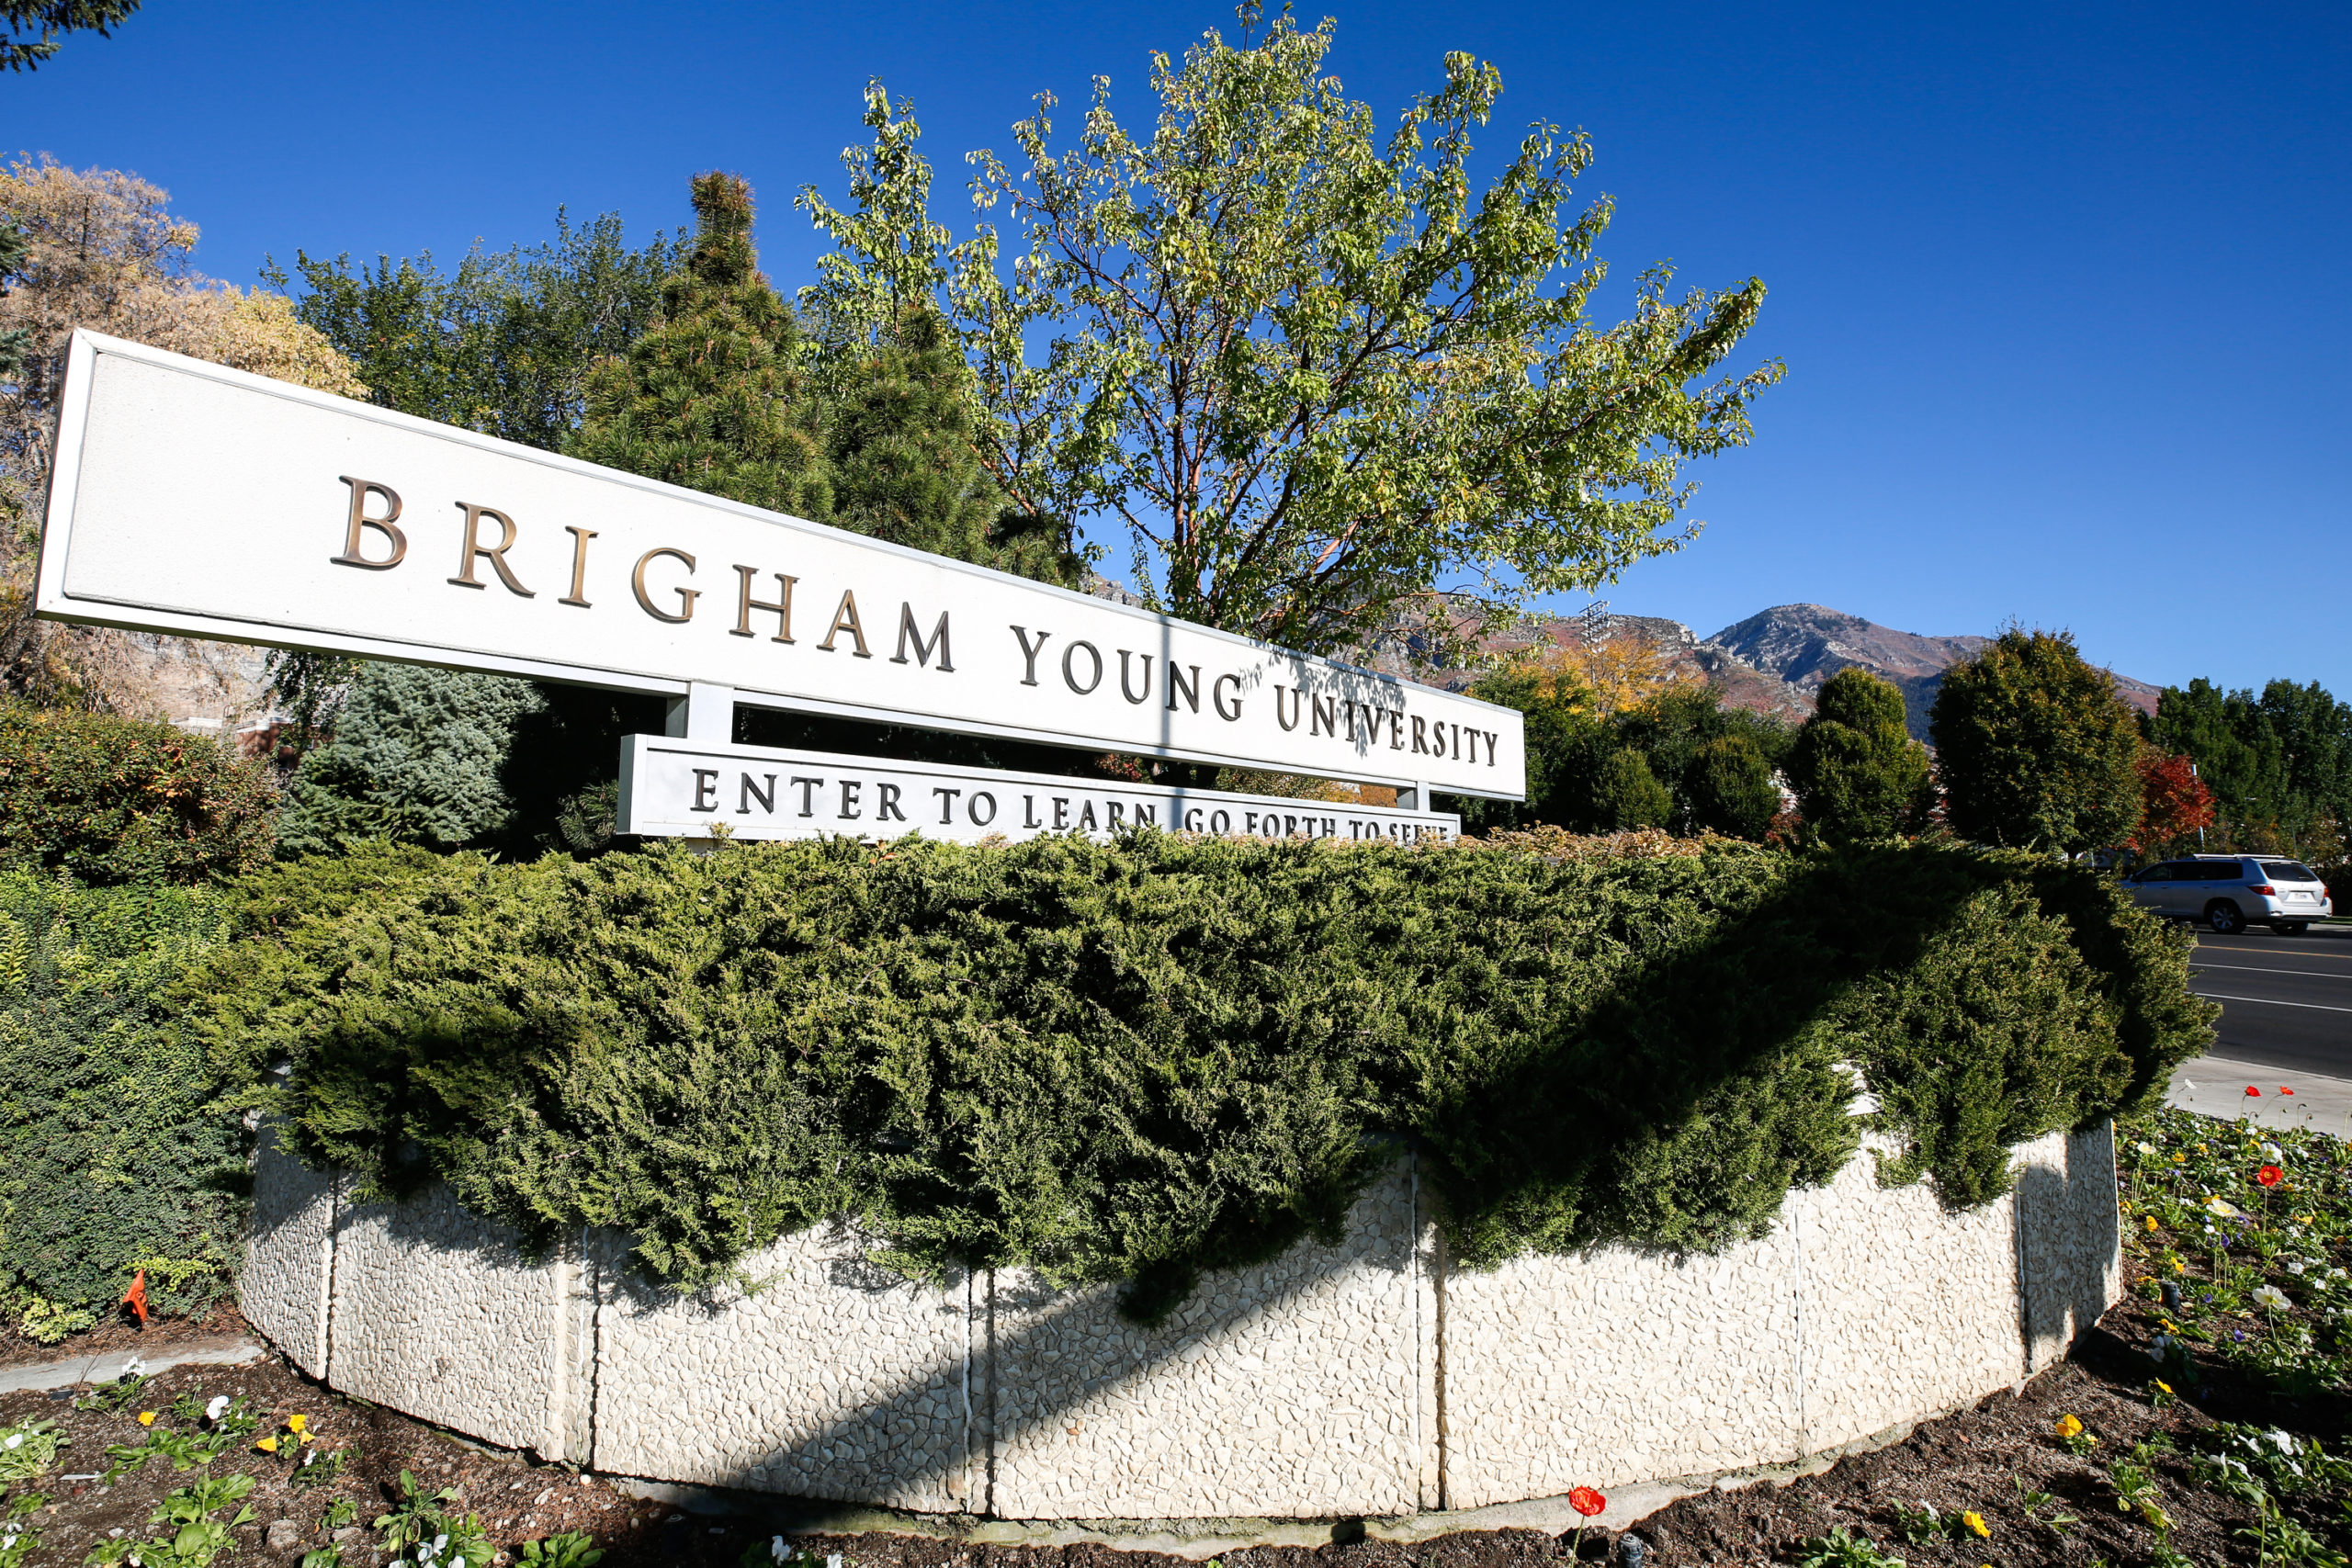 The Brigham Young University campus in Provo is pictured on Monday, Oct. 12, 2020. (Deseret News)...